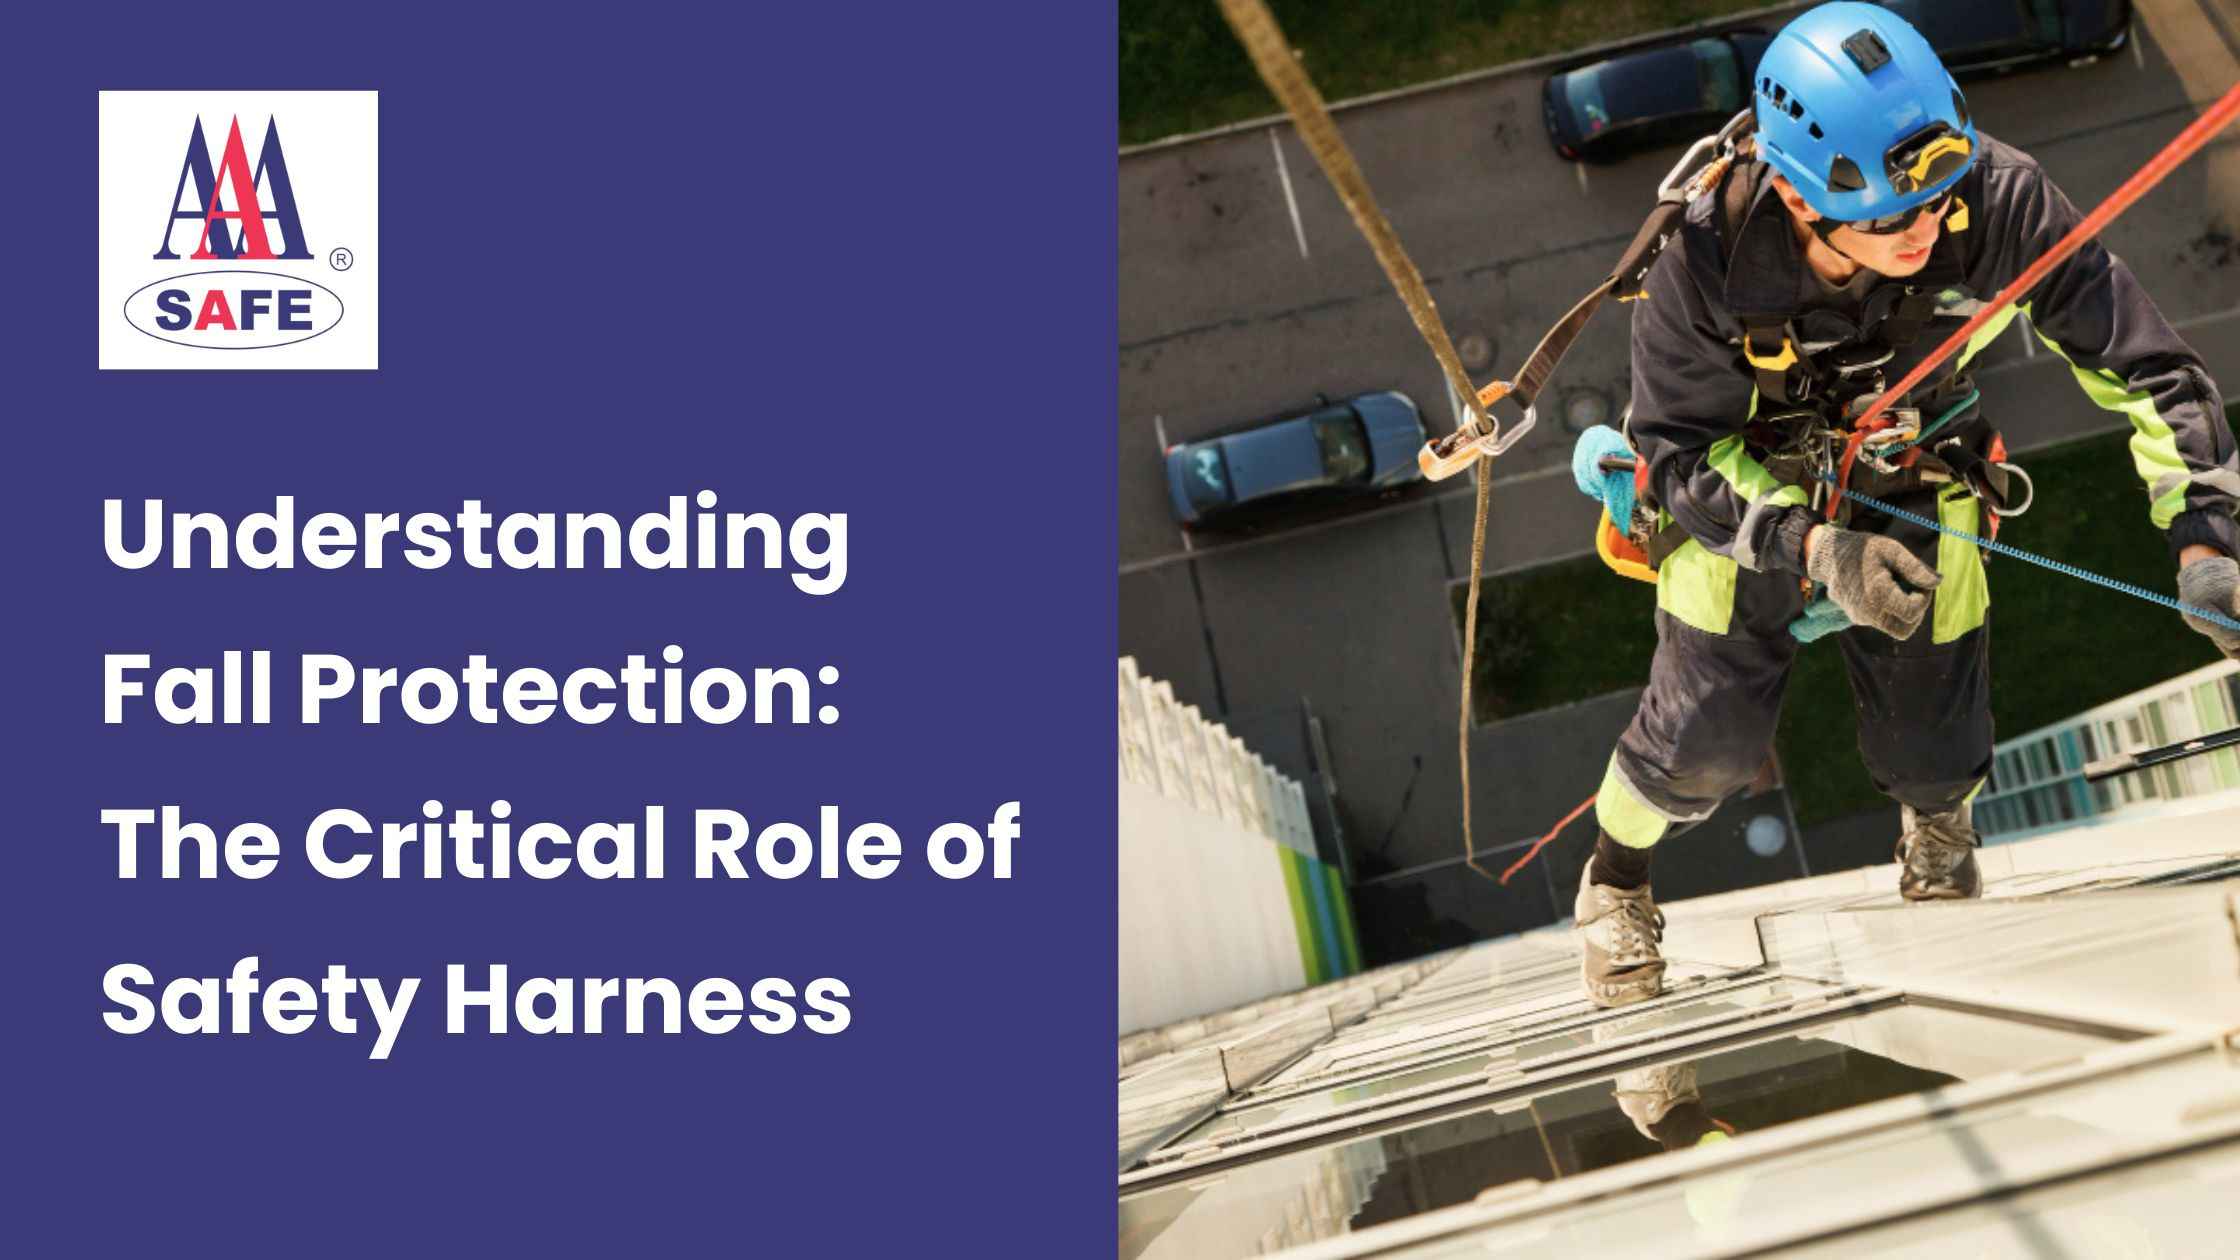 Understanding Fall Protection: The Critical Role of Safety Harness